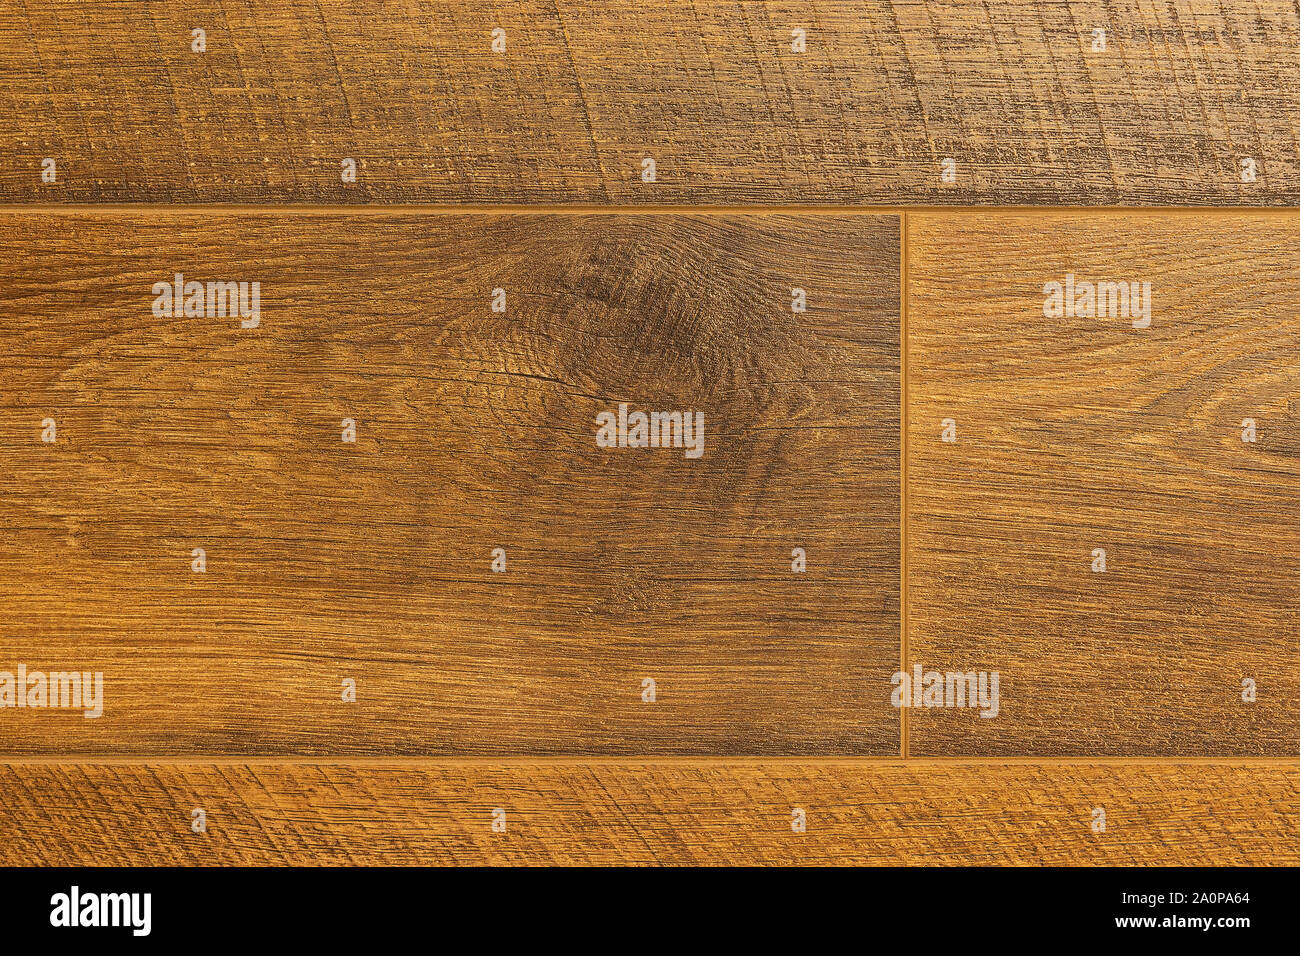 Close-up of light brown laminate floor covering Stock Photo